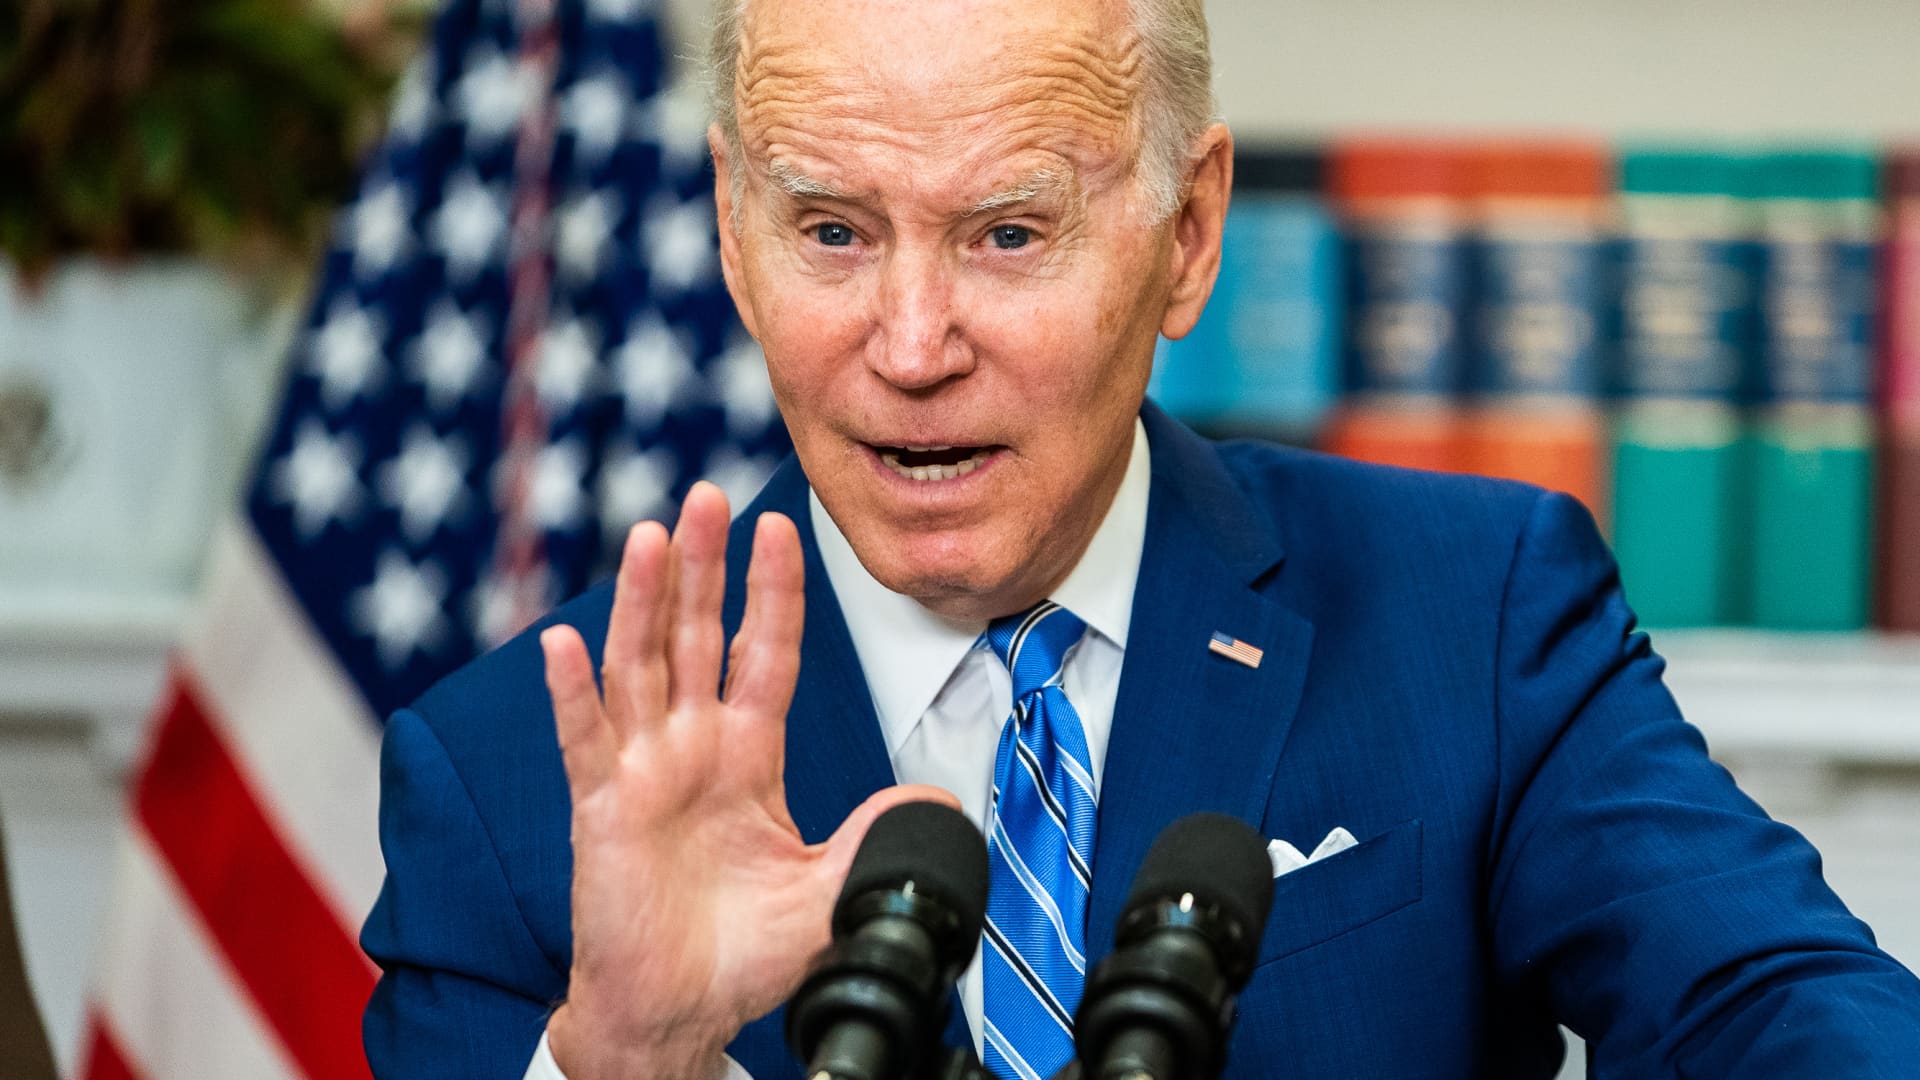 Starbucks criticizes Biden’s visit with union leaders, requests White House meeting